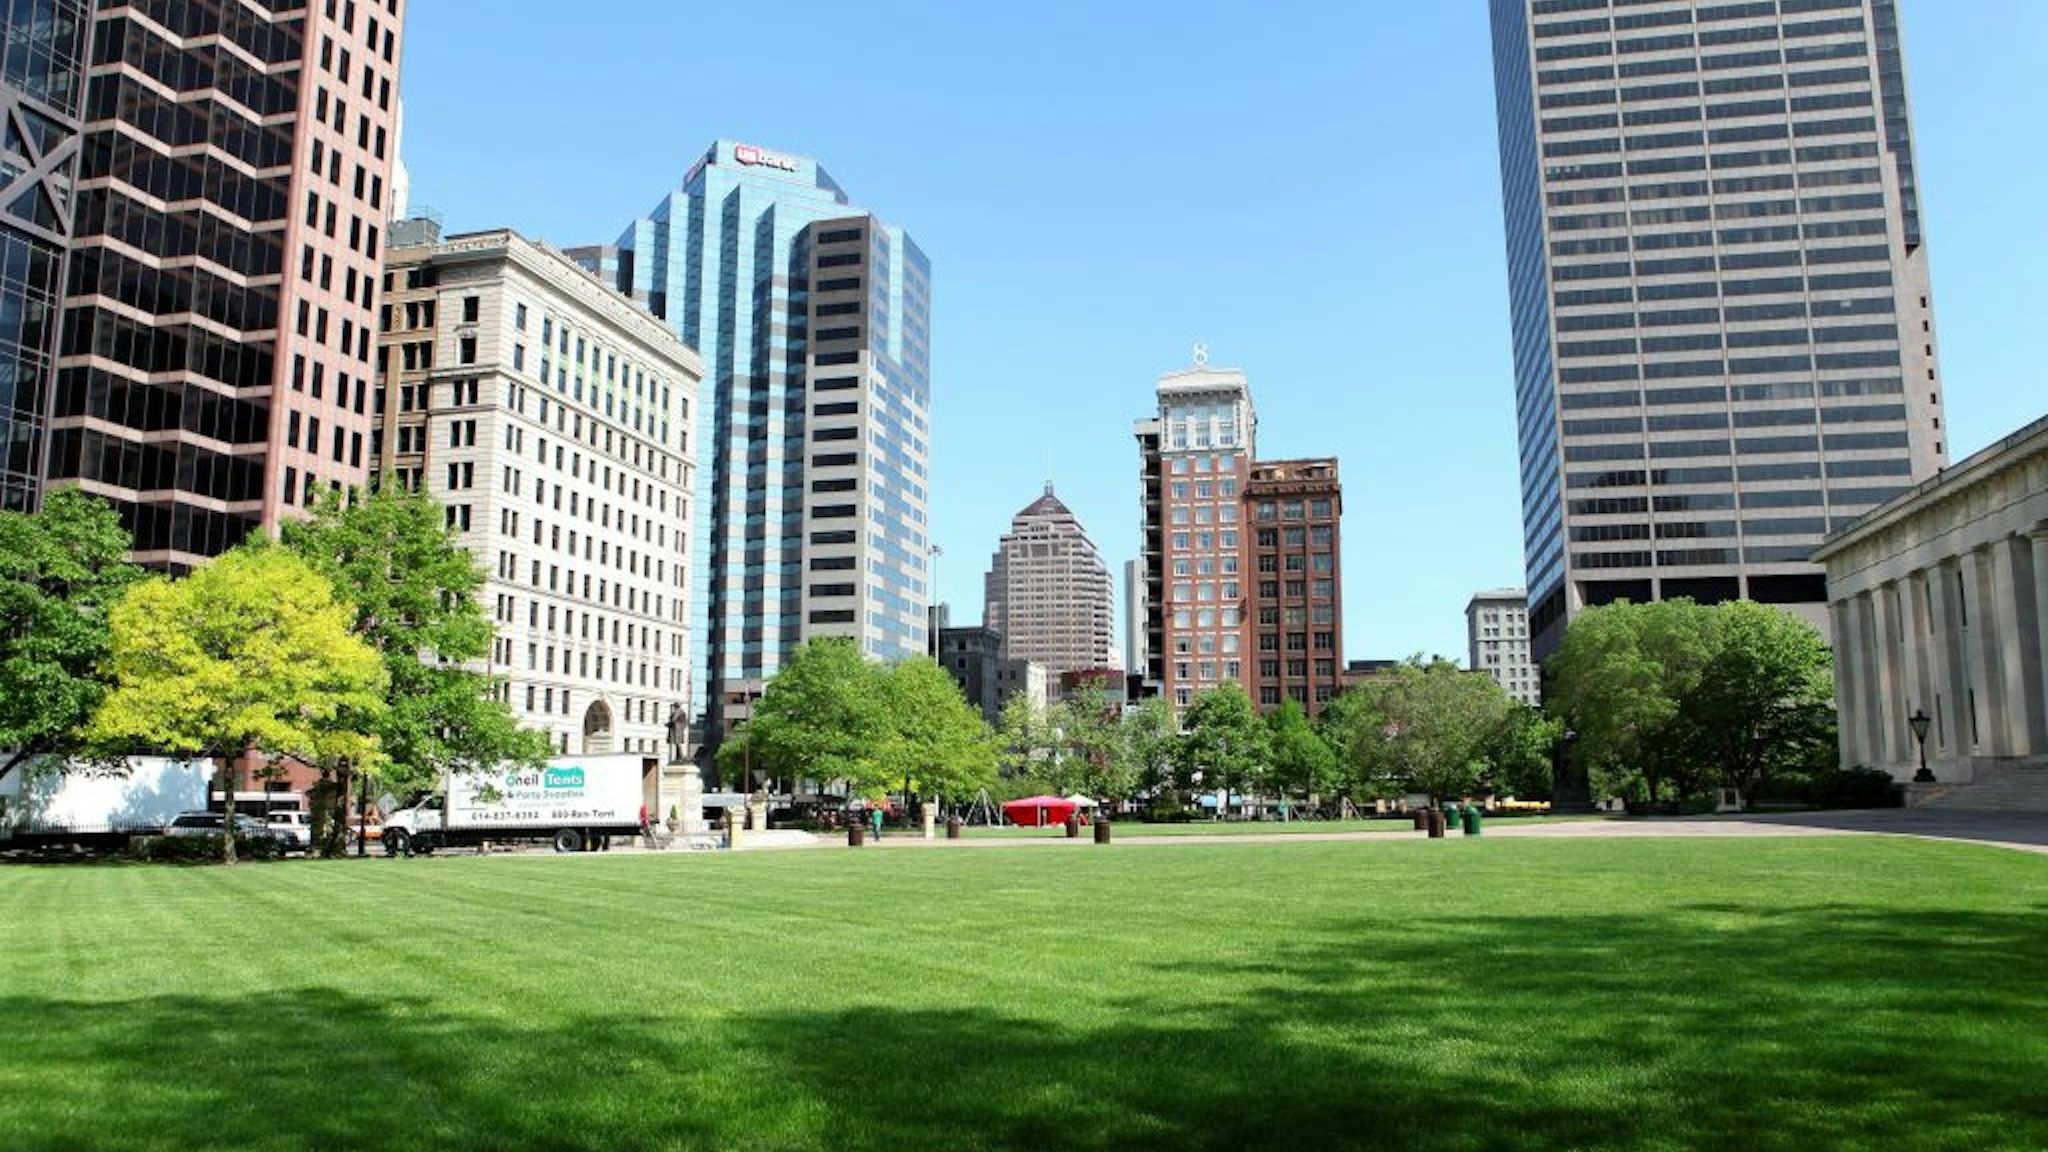 COLUMBUS, OH - MAY 16: Partial view of downtown Columbus, as photographed from Capitol Square on May 16, 2014 in Columbus, Ohio.